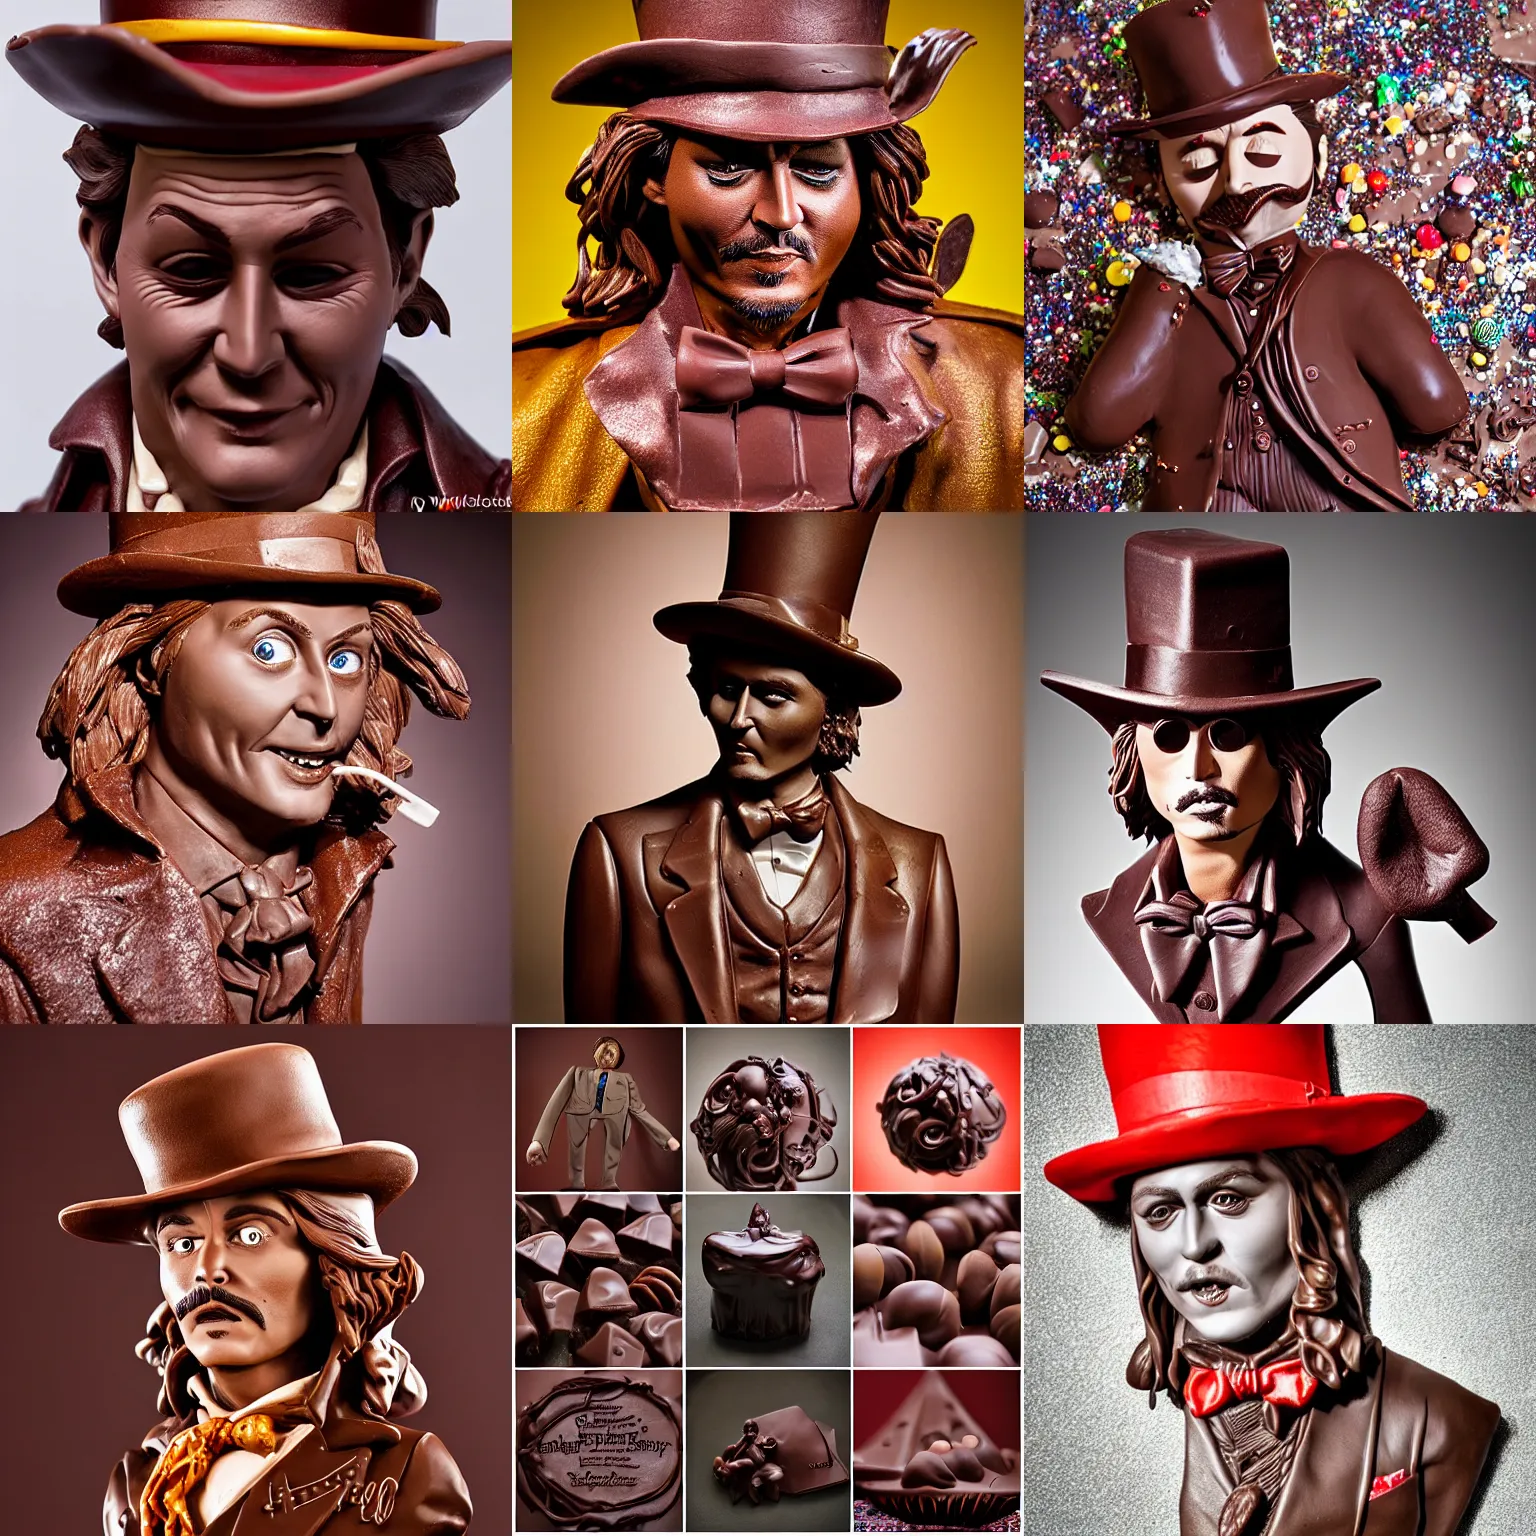 Prompt: chocolate! sculpture of johnny! depp! as ( ( willy wonka ) ), chocolate art, candy decorations, fully chocolate, studio lighting, food photography